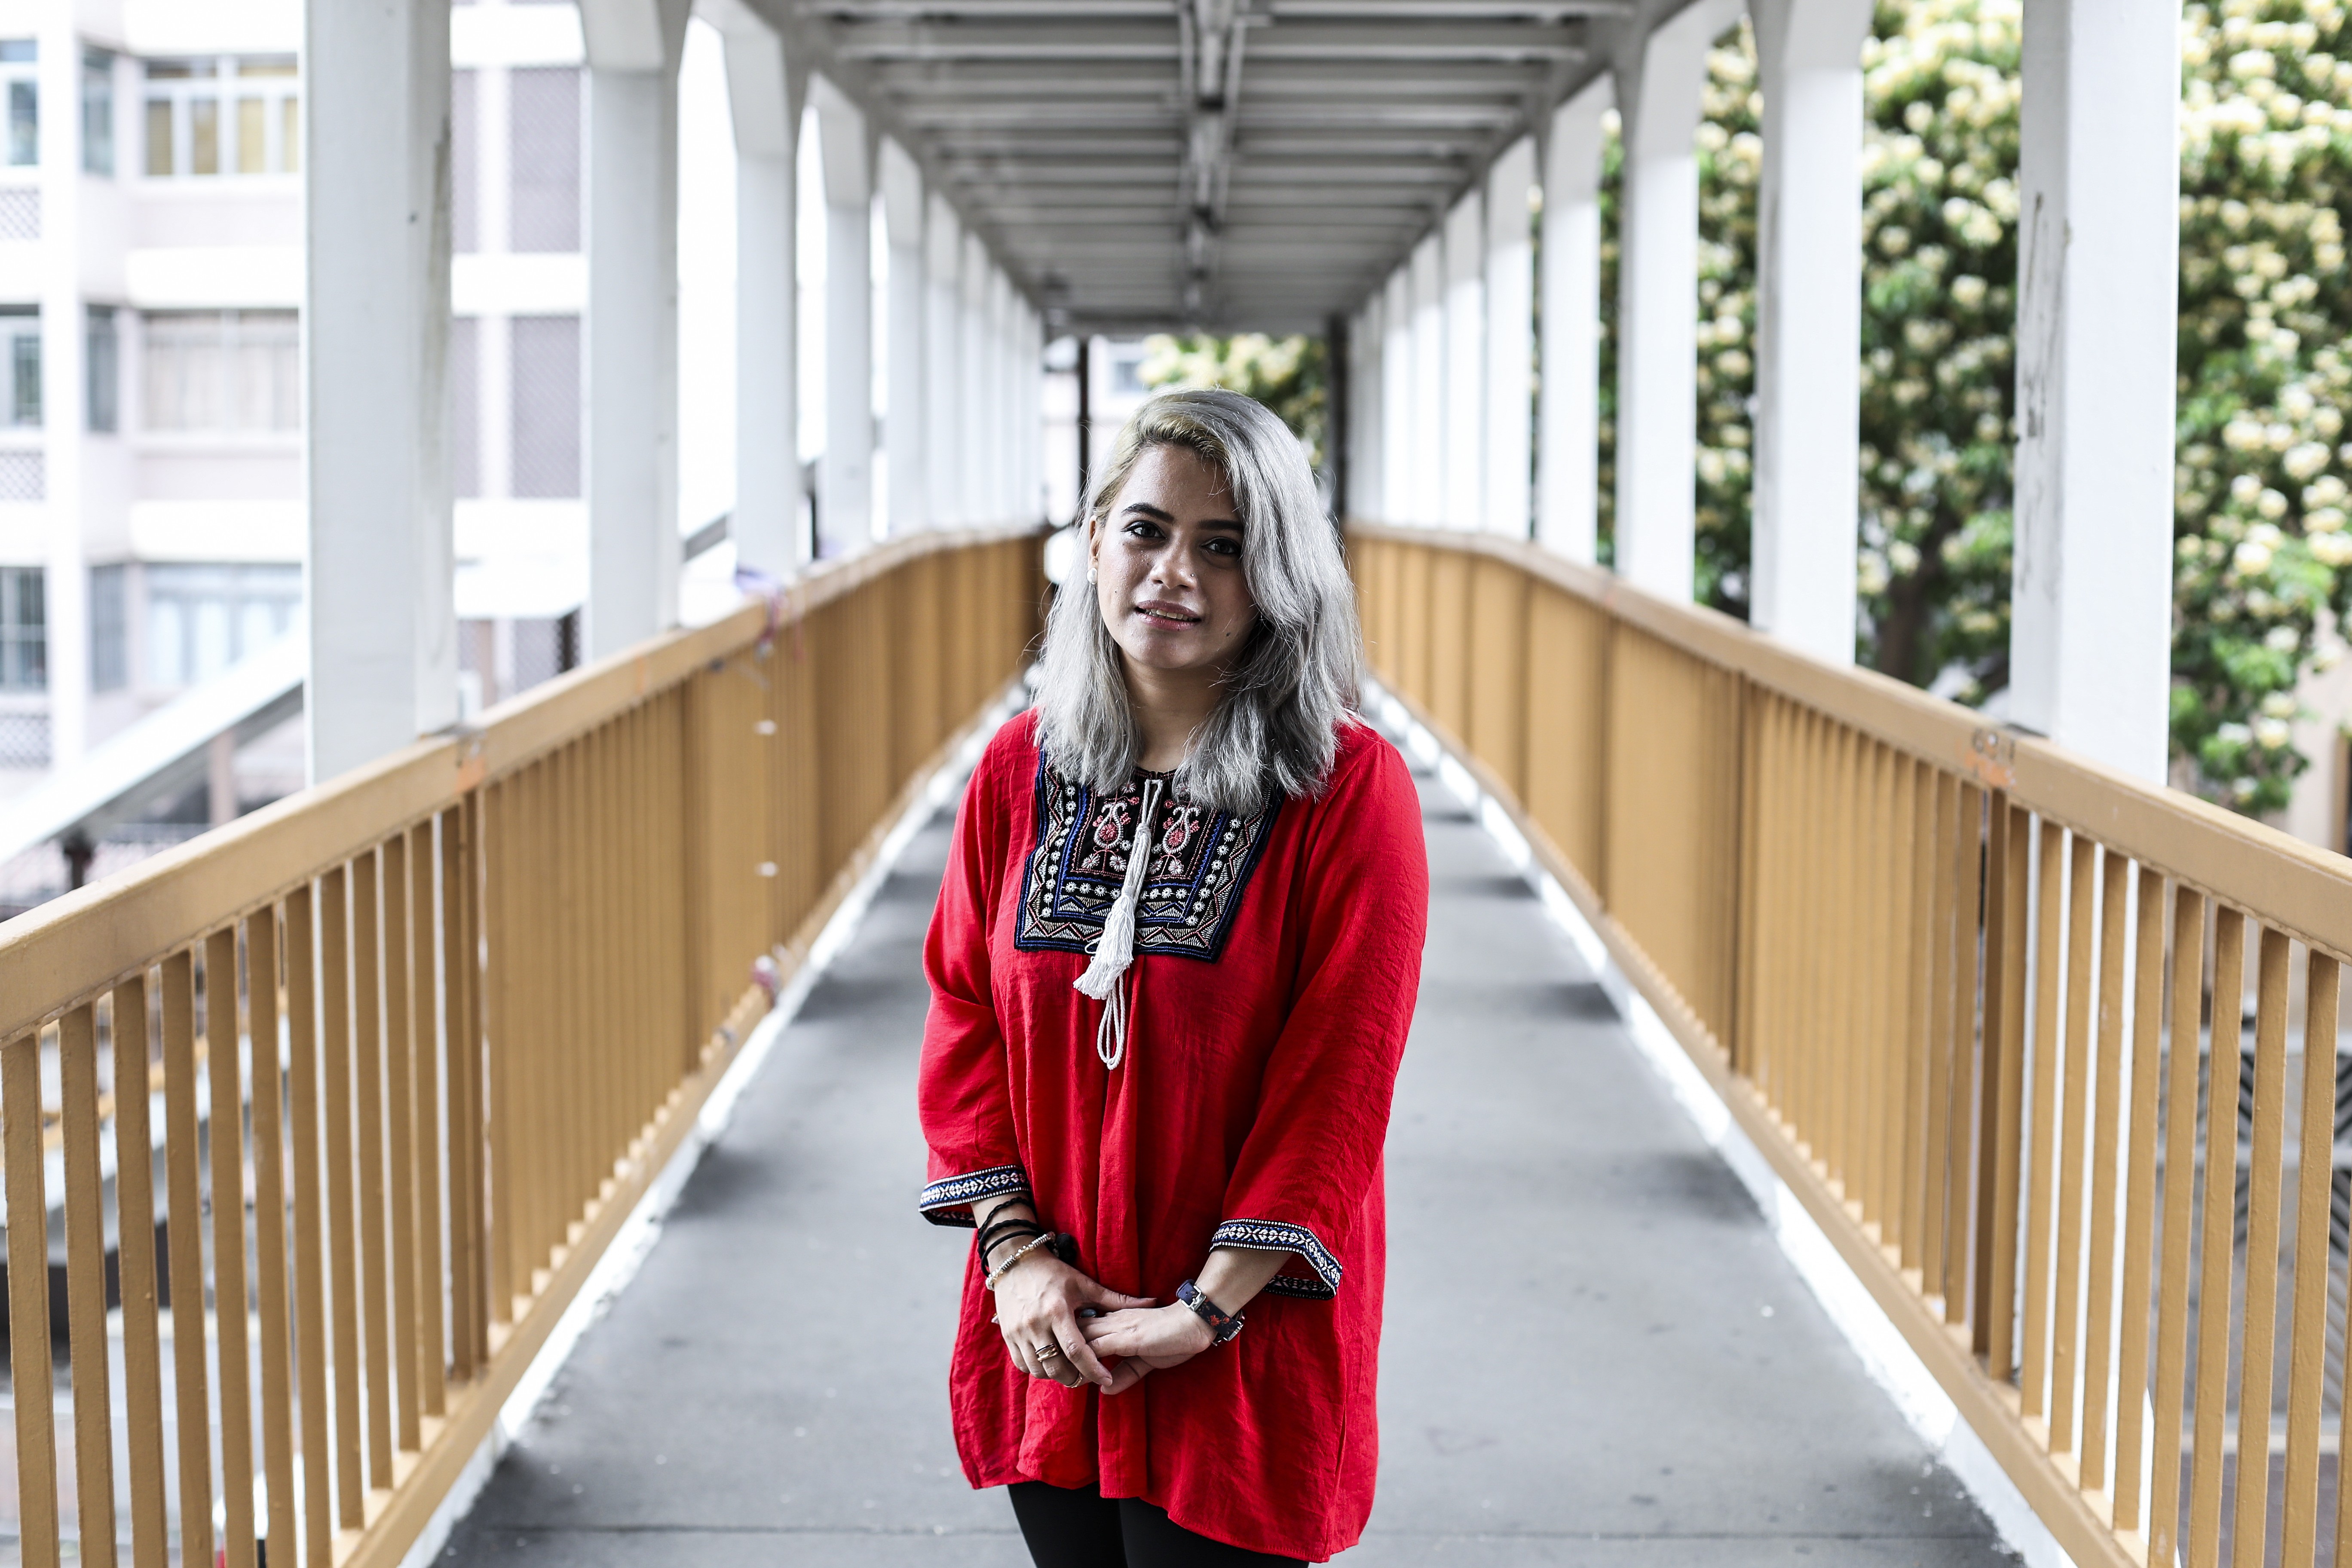 ‘It was the first time I had felt such acceptance,’ says Ansah Majeed Malik, of Pakistani heritage, about Hong Kong’s Occupy protest movement of 2014. Photo: Nora Tam